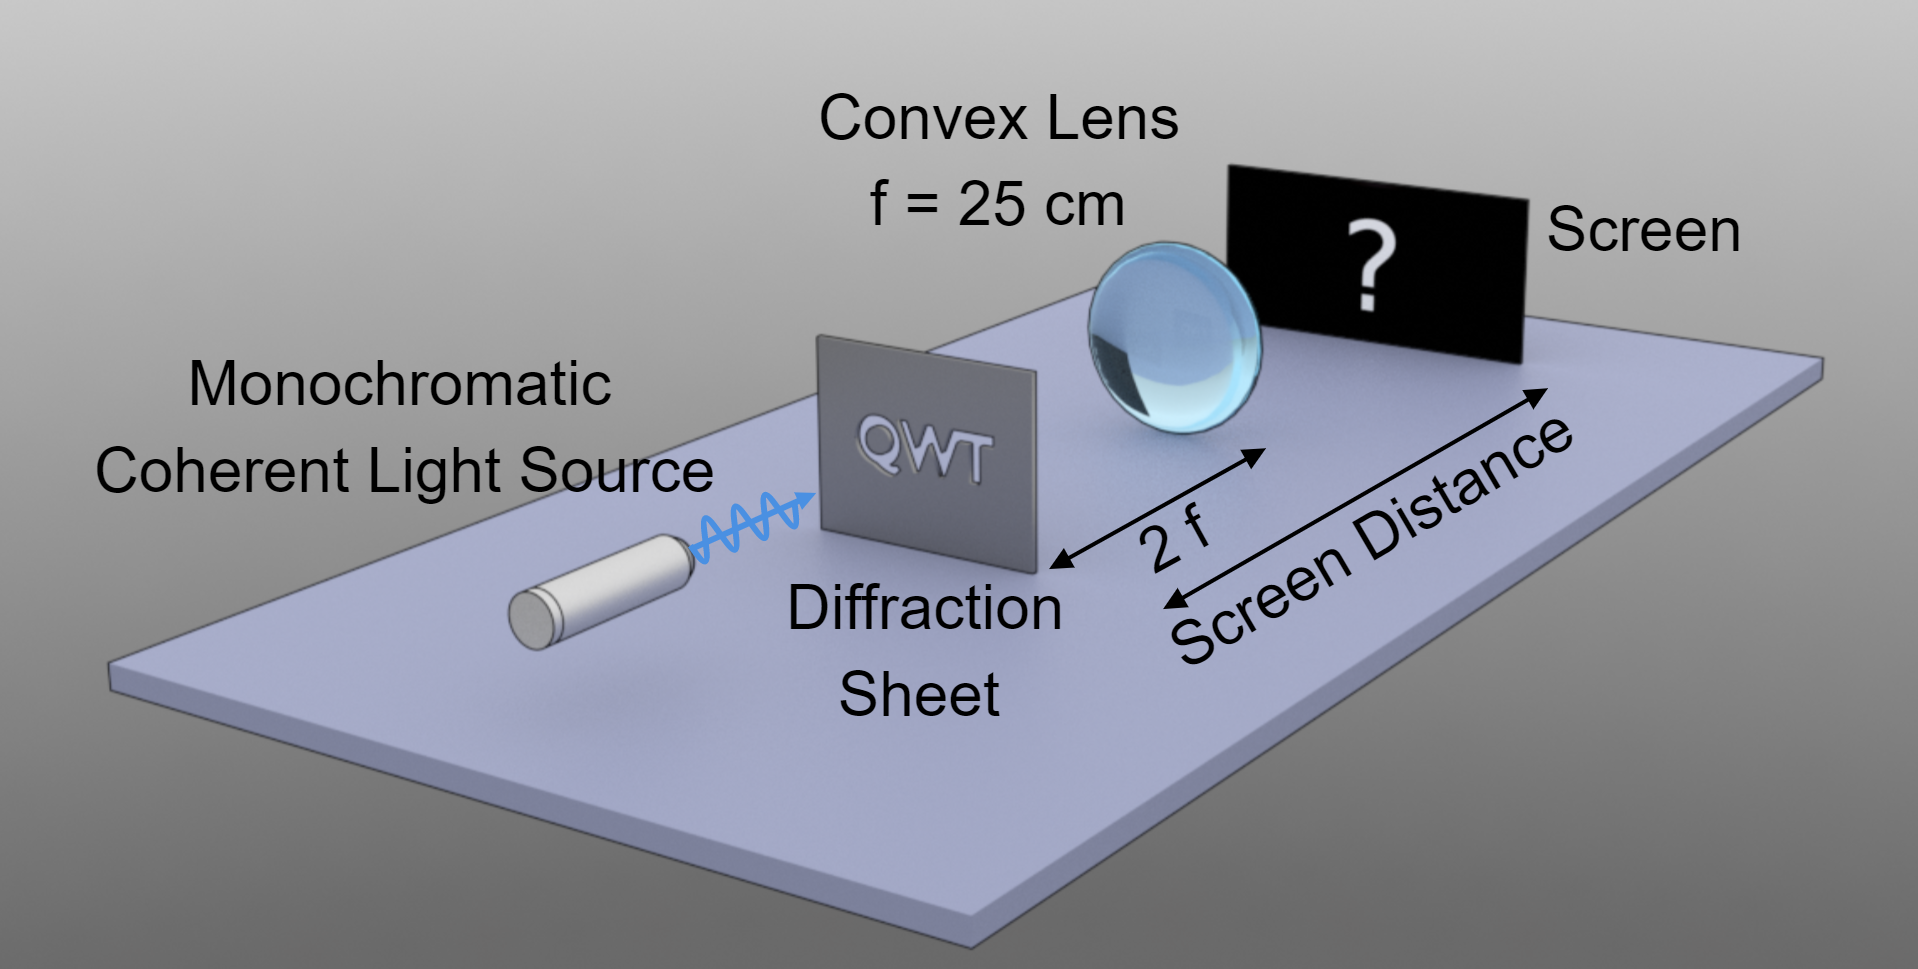 Thin lens modeled as a phase transformation